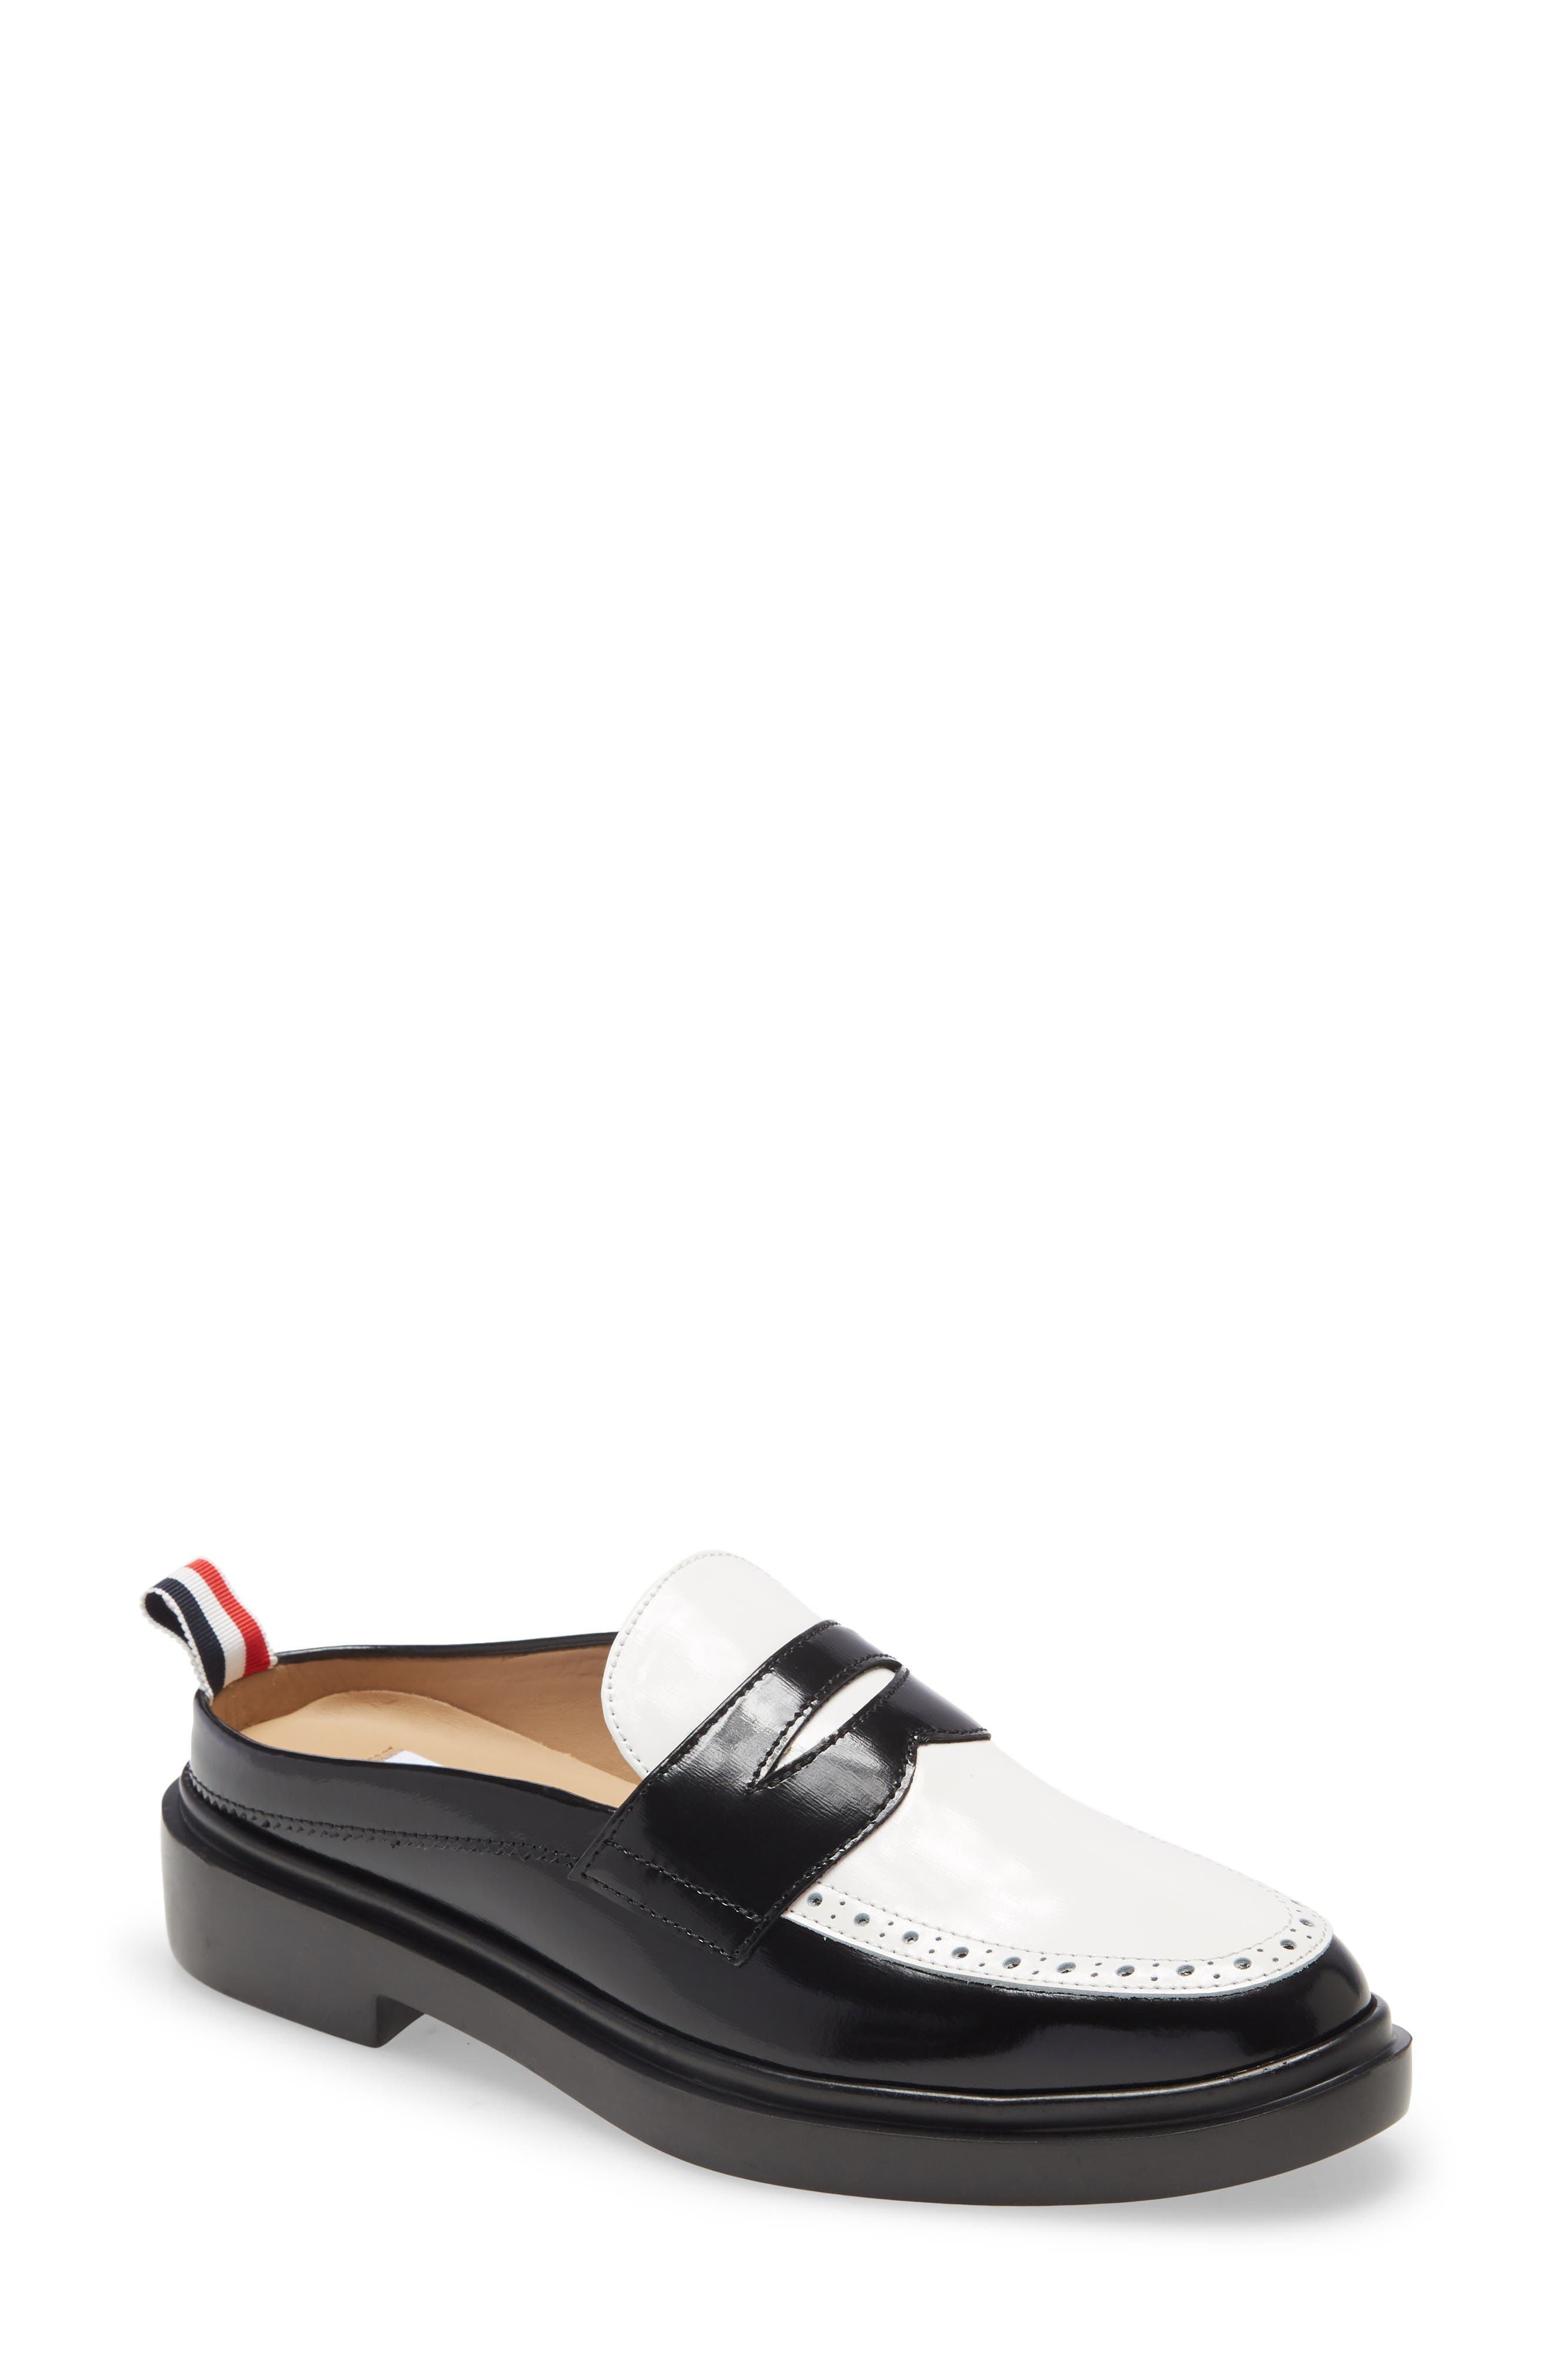 white penny loafers womens